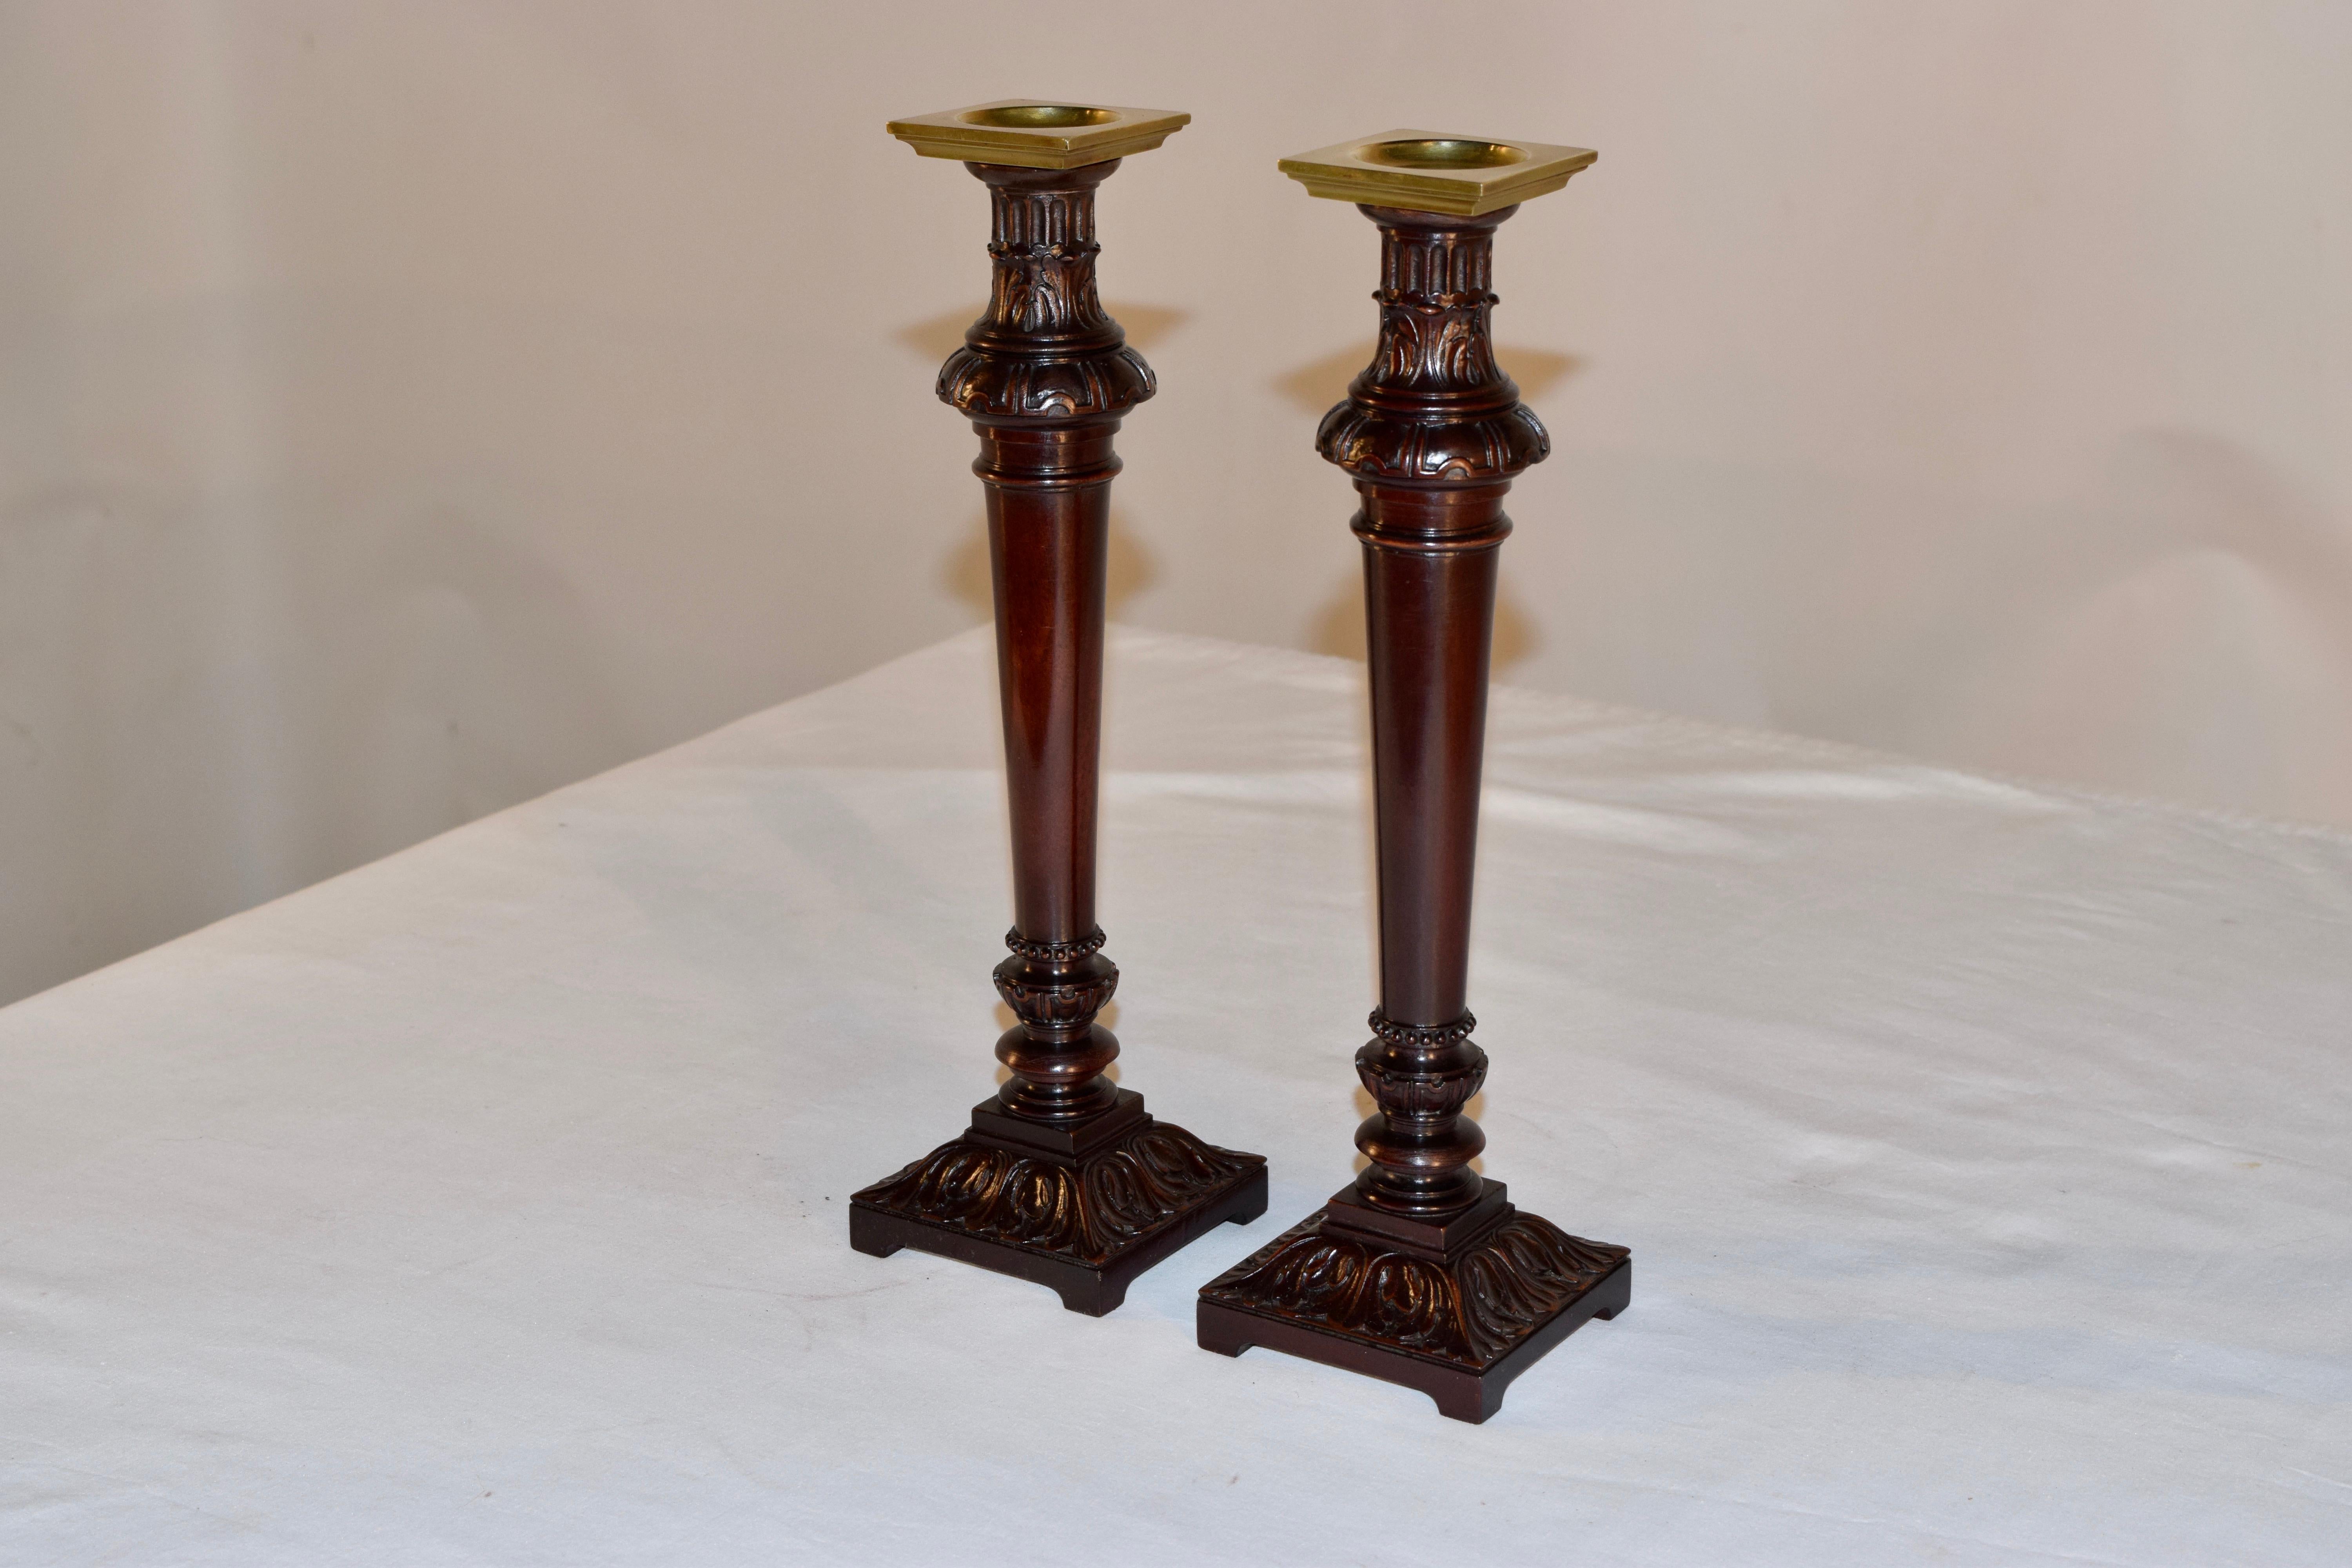 Pair of English mahogany candlesticks, circa 1810. The tops are made from heavy cast brass, and are supported on hand turned and carved decorated stems with wonderfully square pedestal bases which are also exquisitely hand carved.